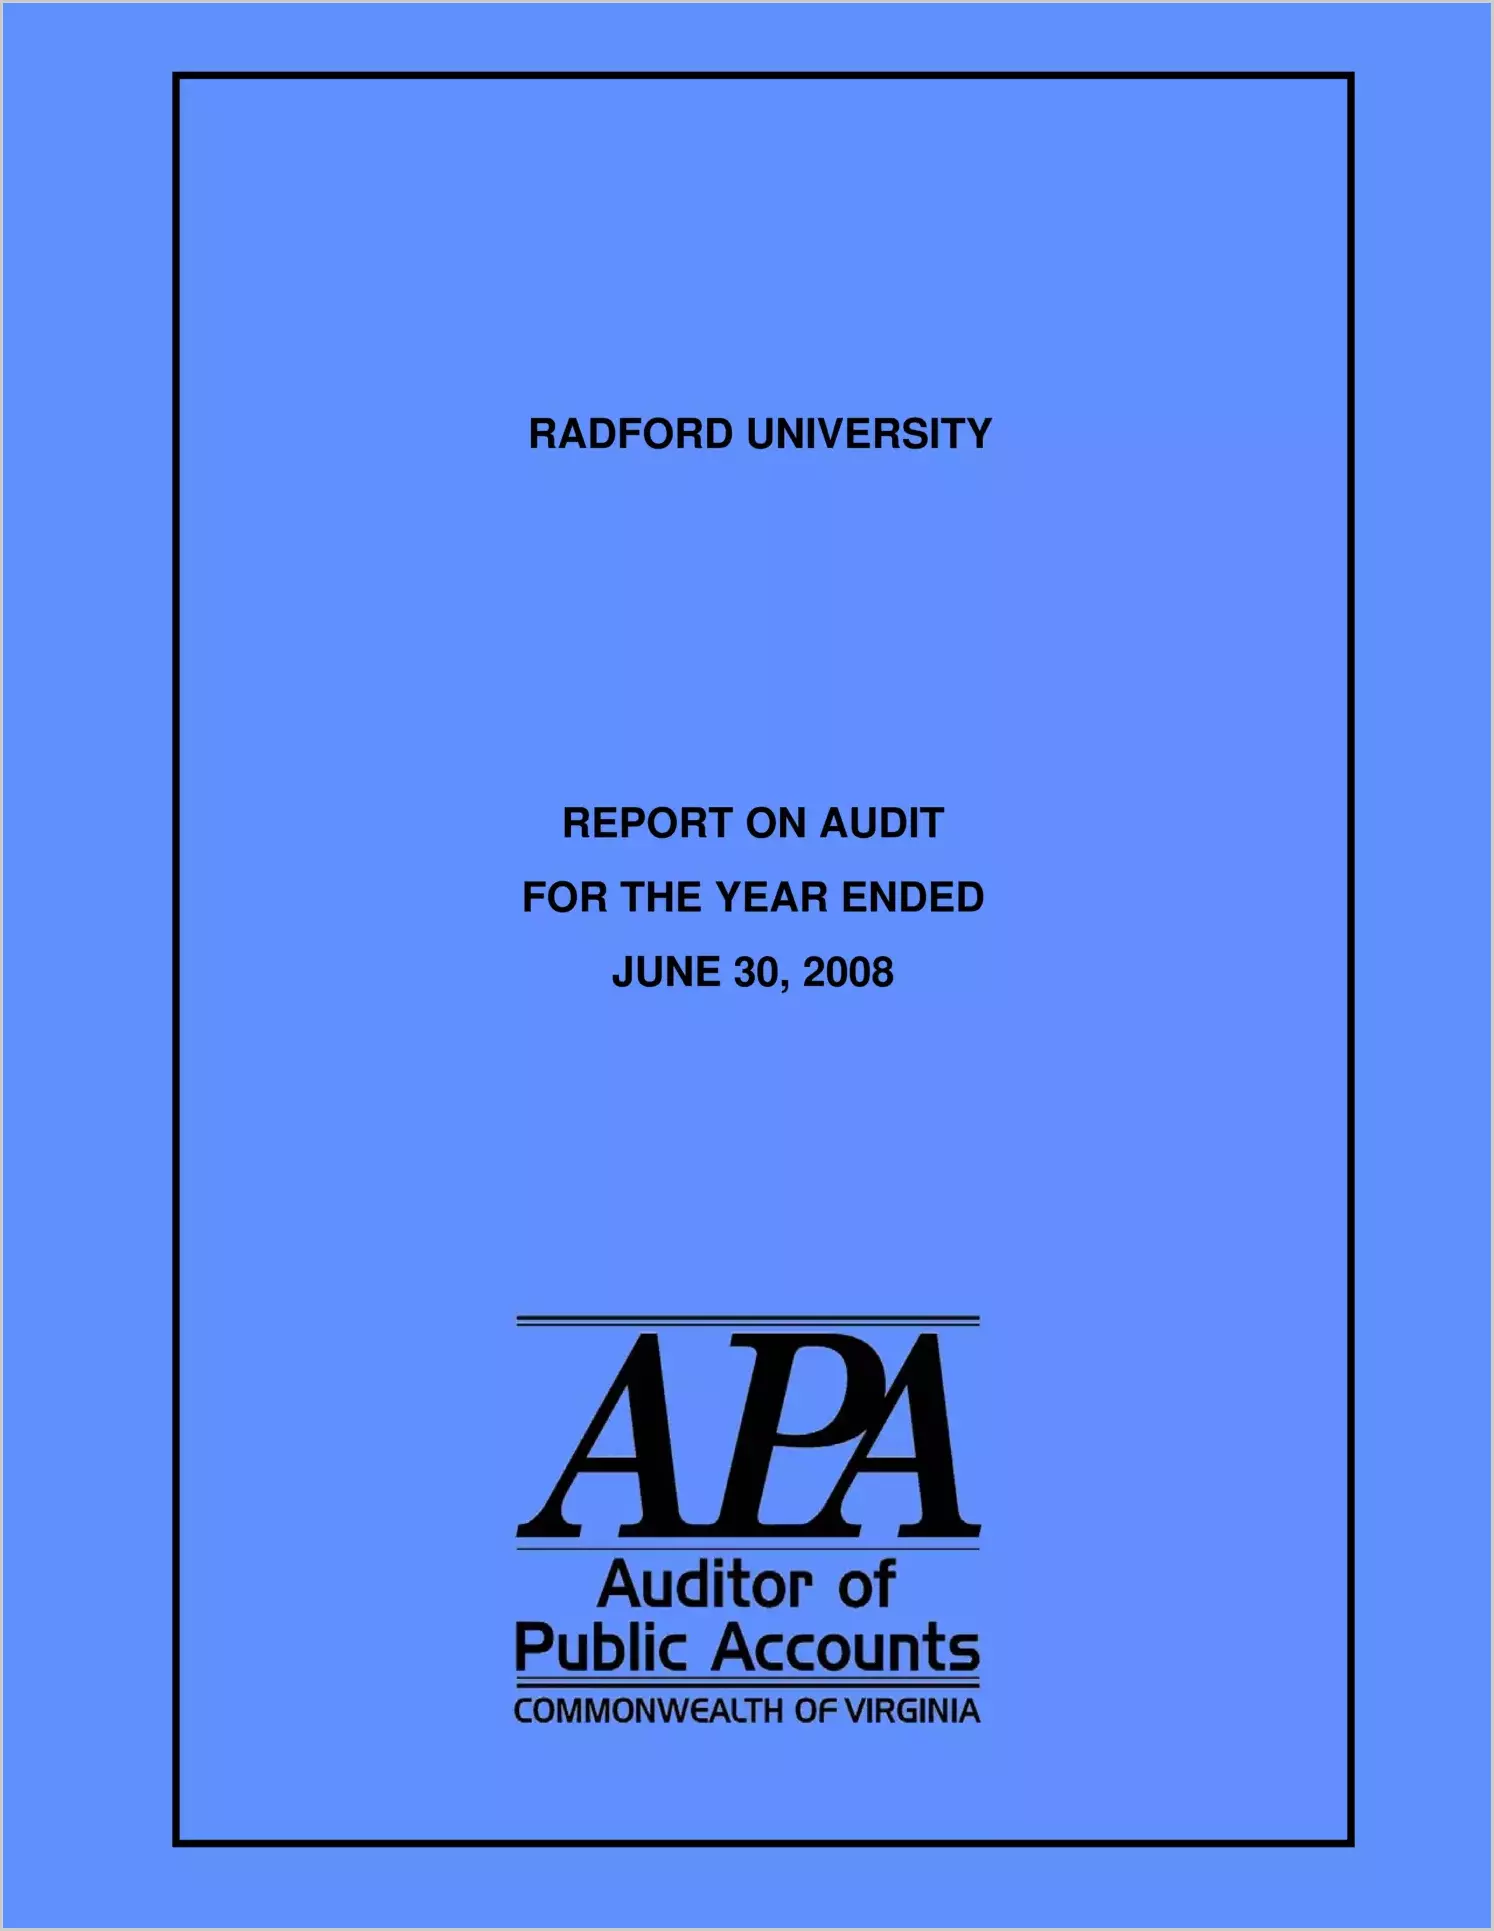 Radford University report on Audit for the year ended June 30, 2008